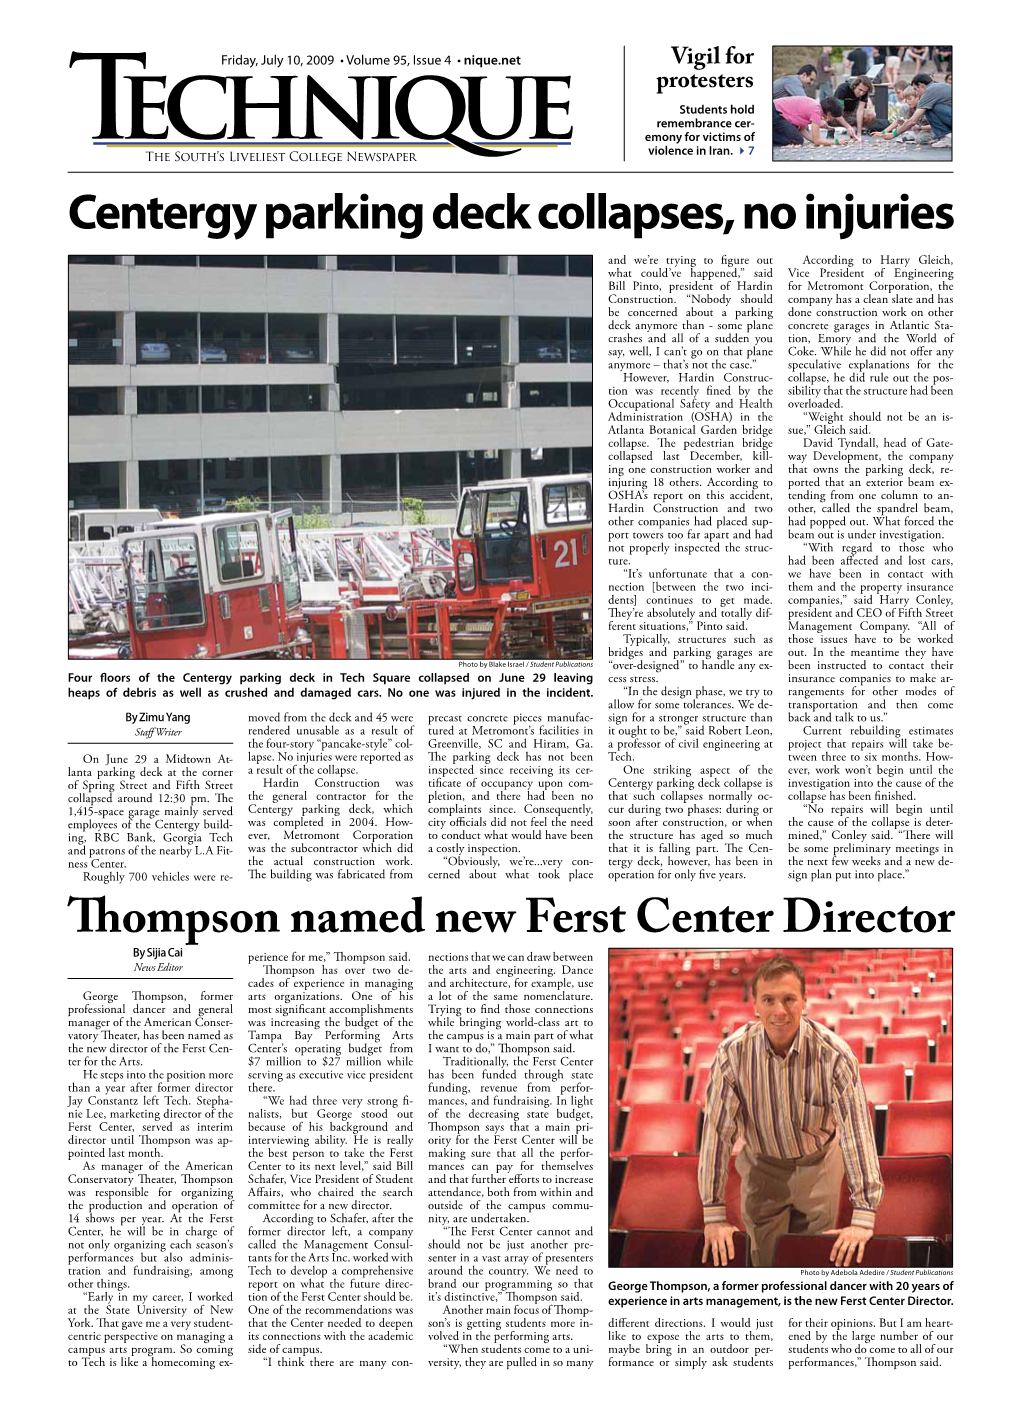 Centergy Parking Deck Collapses, No Injuries